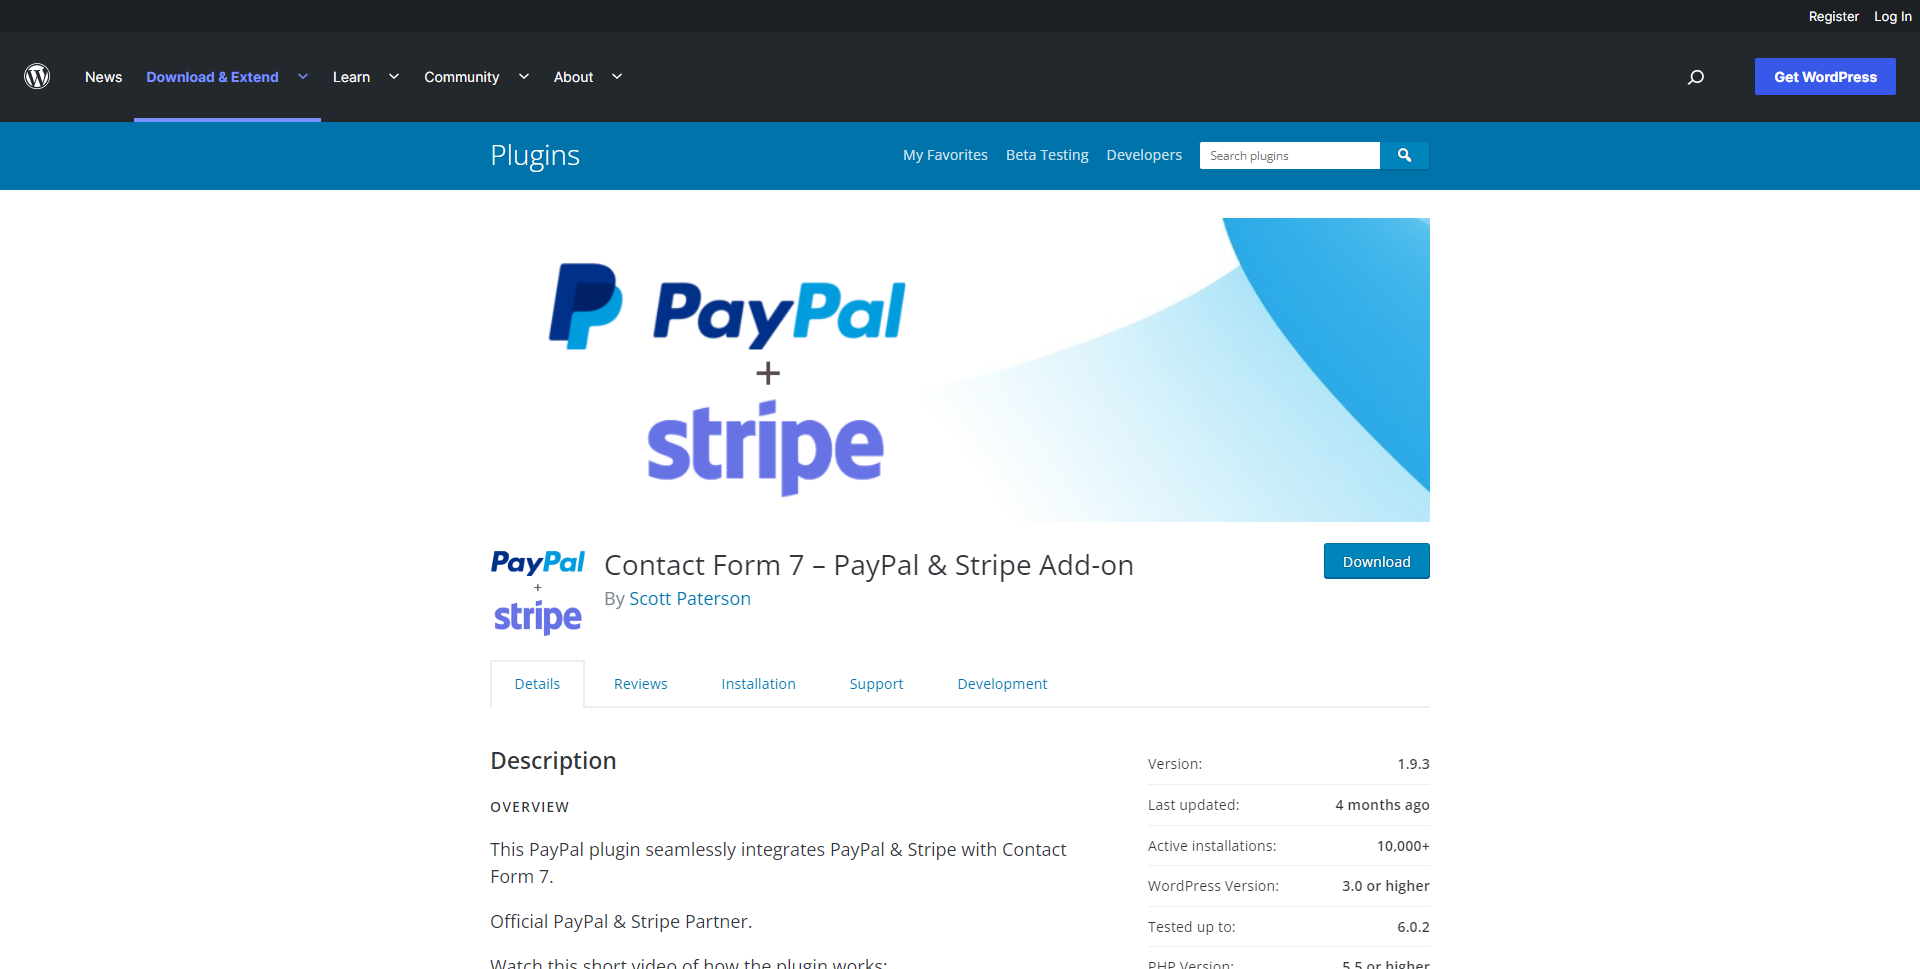 Contact Form 7 with PayPal Add-on